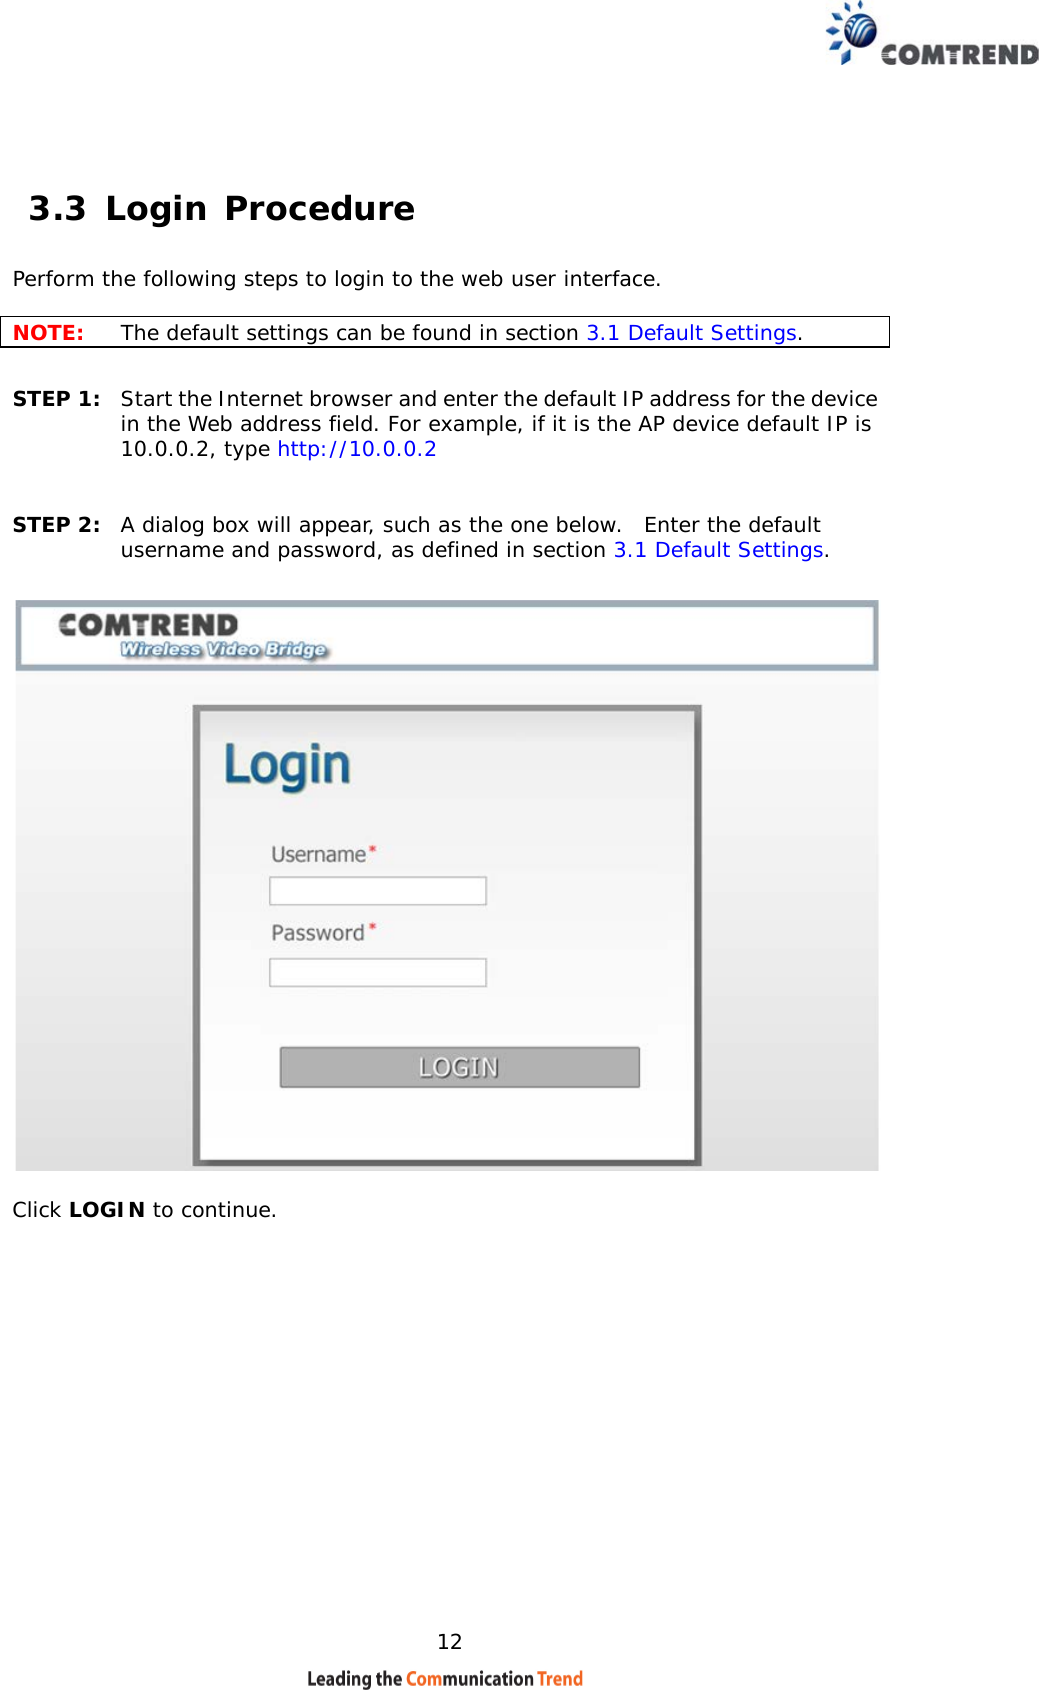    12  3.3 Login Procedure Perform the following steps to login to the web user interface.    NOTE: The default settings can be found in section 3.1 Default Settings.     STEP 1:  Start the Internet browser and enter the default IP address for the device in the Web address field. For example, if it is the AP device default IP is 10.0.0.2, type http://10.0.0.2  STEP 2:  A dialog box will appear, such as the one below.  Enter the default username and password, as defined in section 3.1 Default Settings.    Click LOGIN to continue.                   